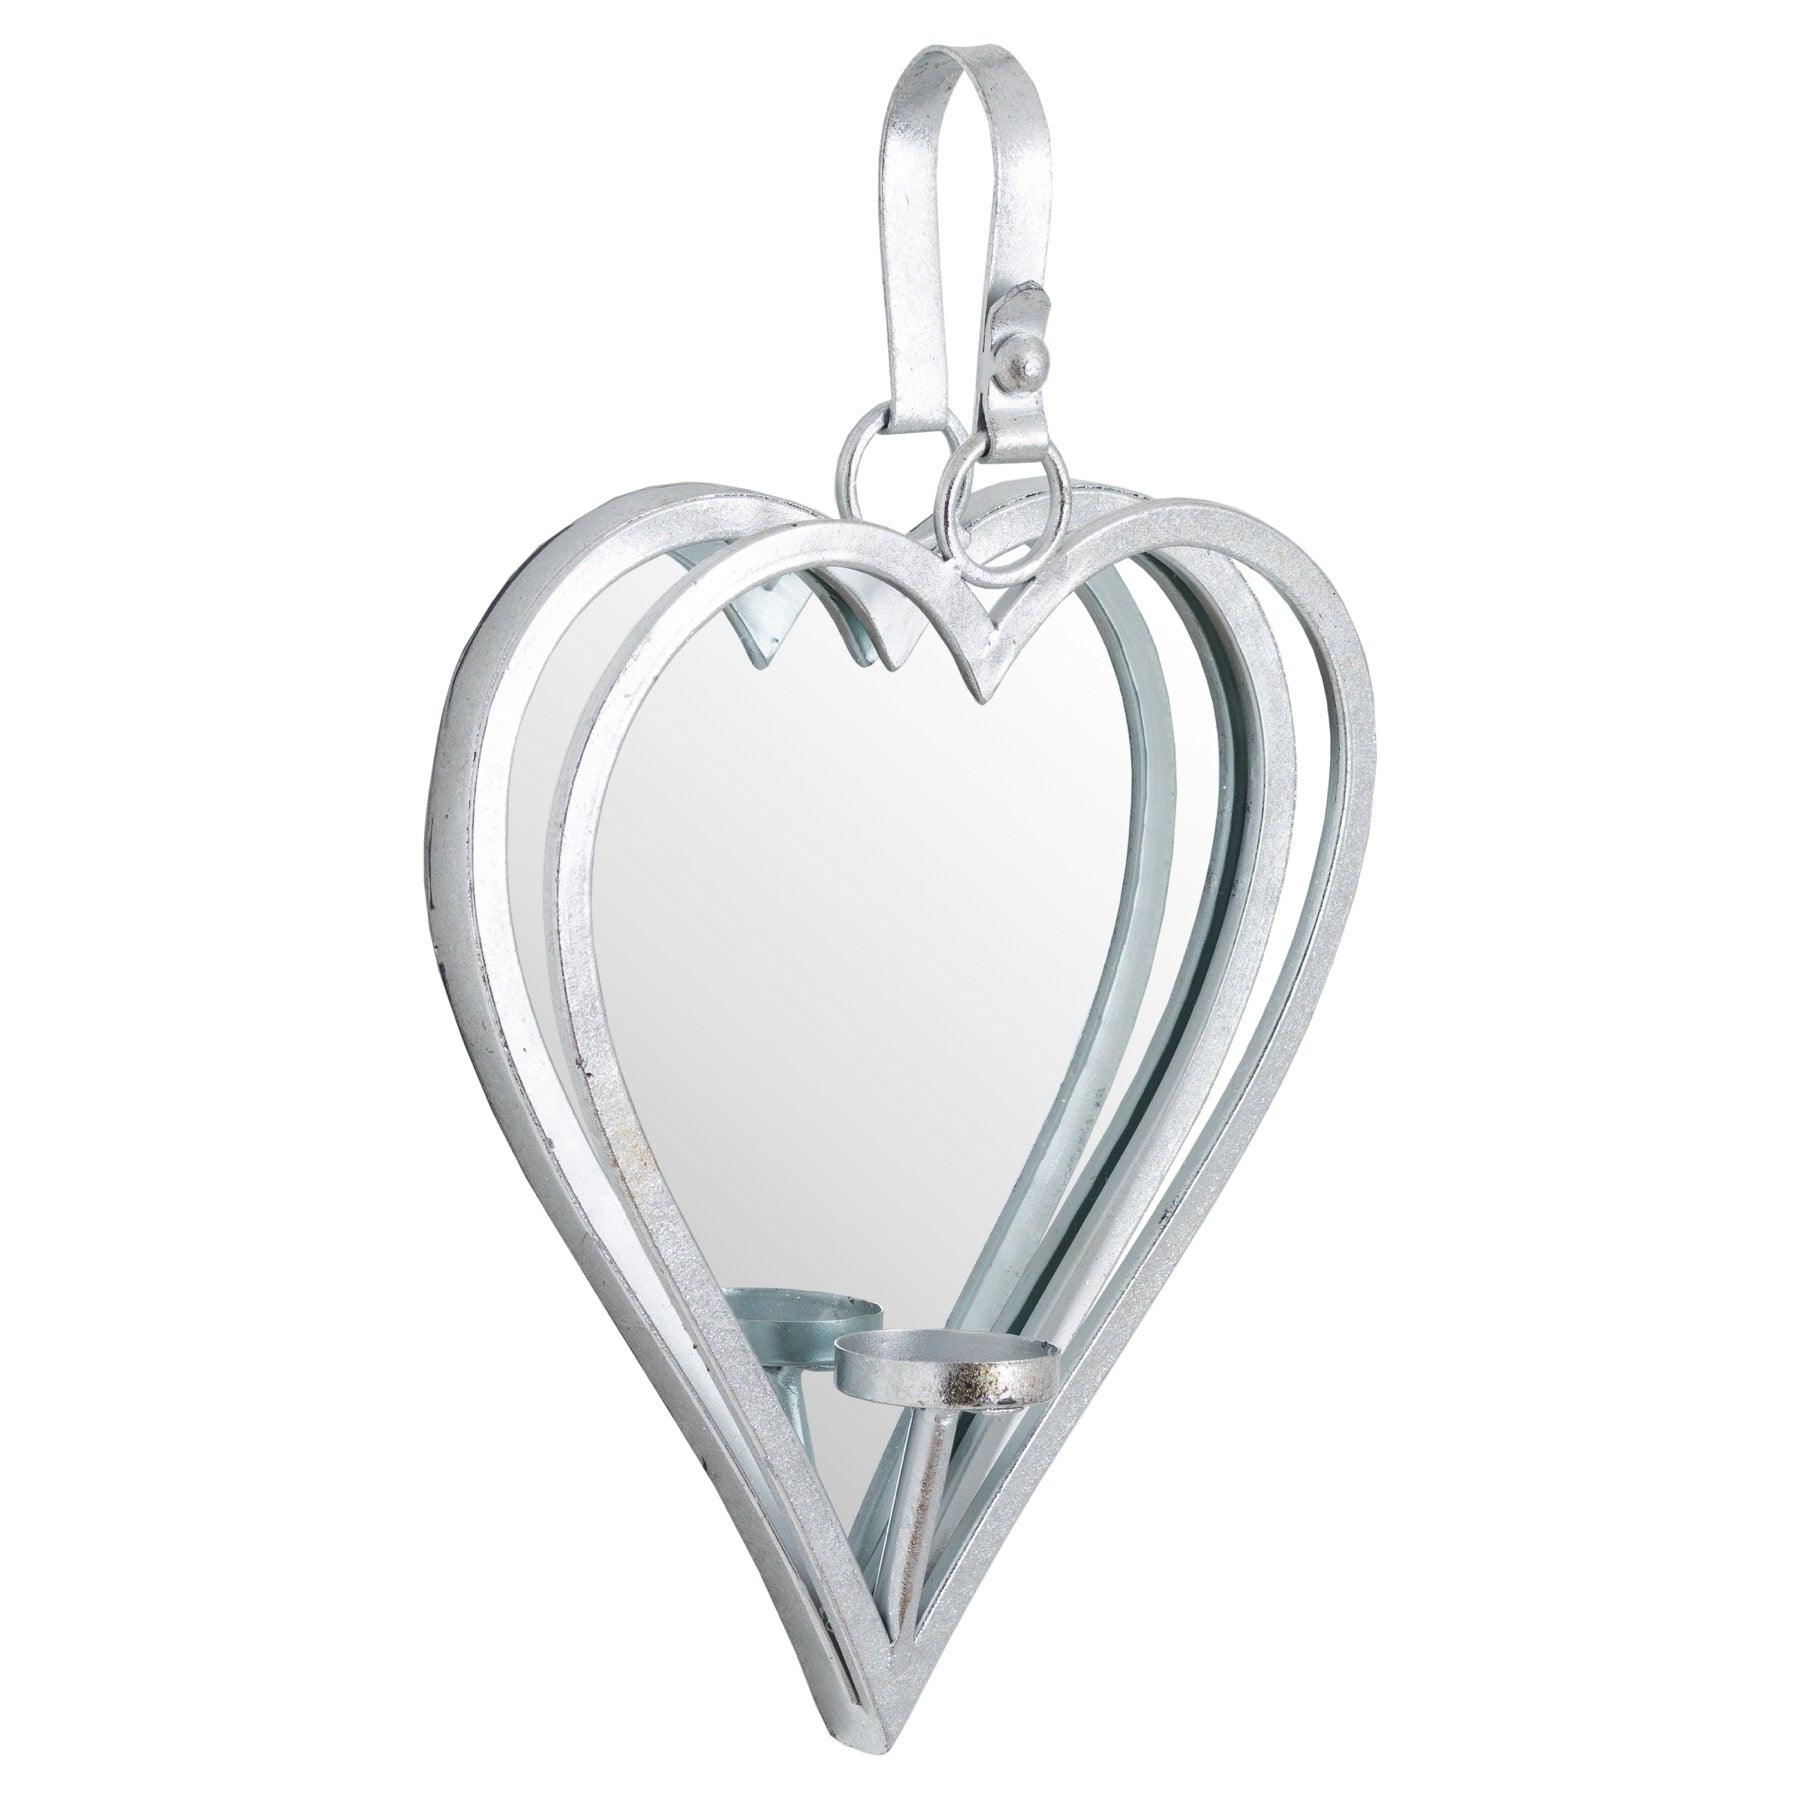 View Small Silver Mirrored Heart Candle Holder information